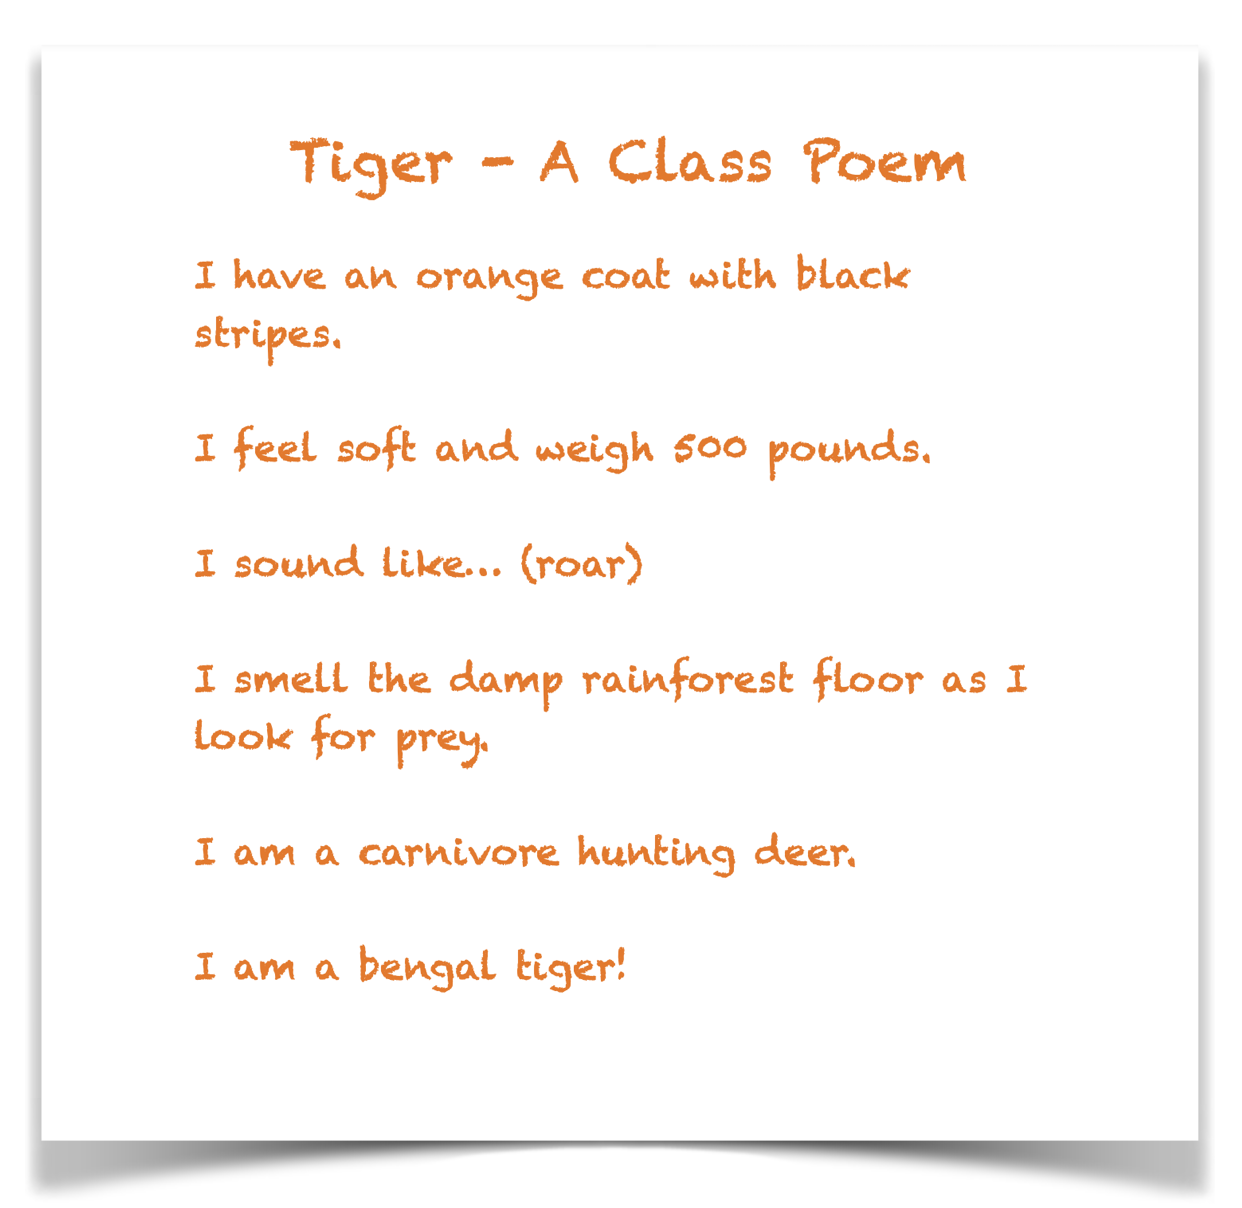 An example of a class poem about a tiger.